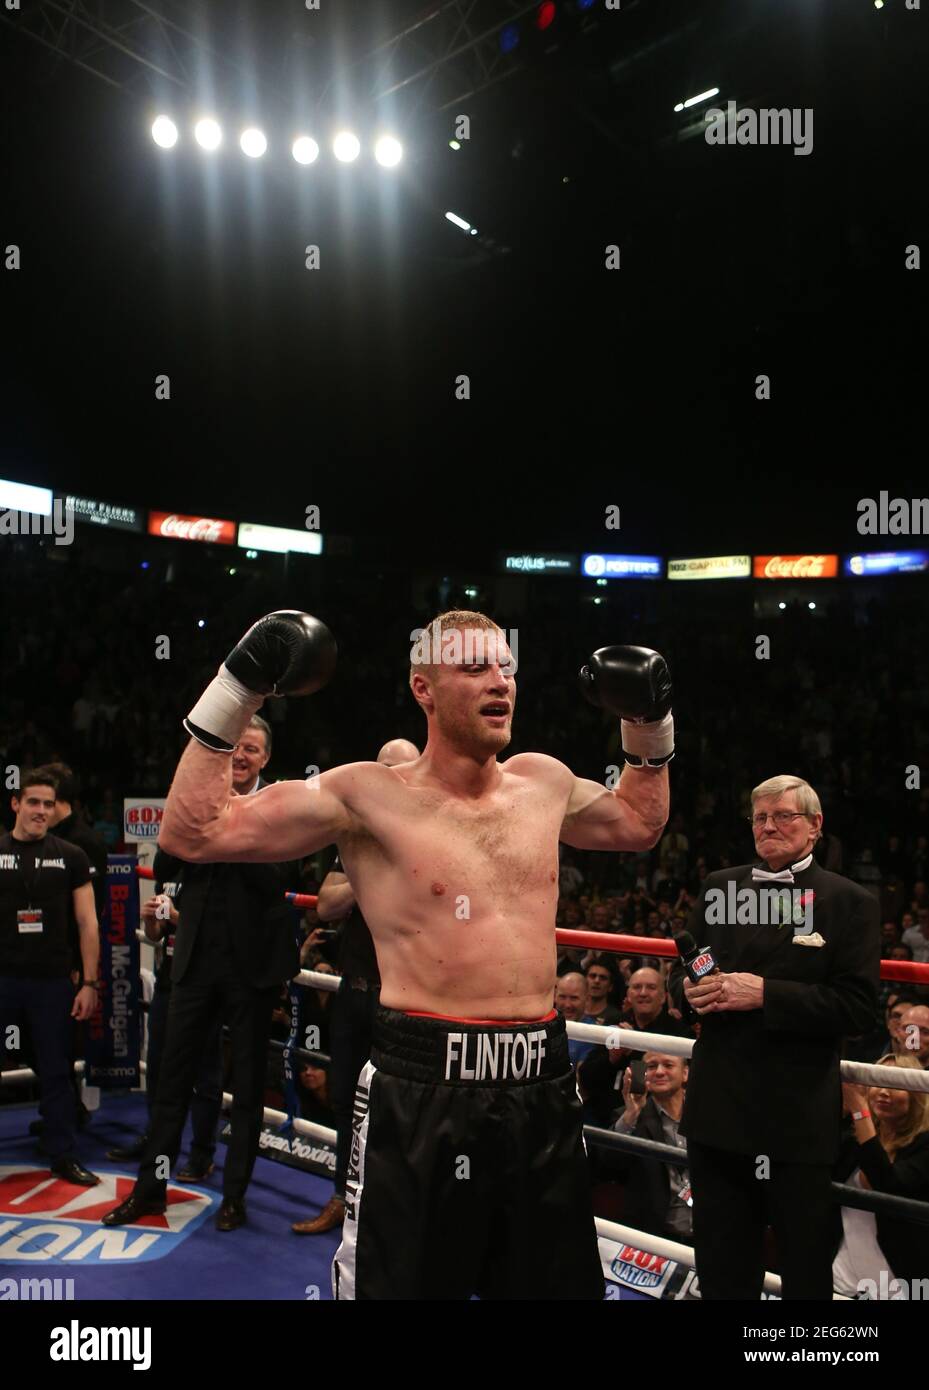 Boxing - Andrew Flintoff v Richard Dawson - Manchester Arena - 30/11/12  Andrew Flintoff celerates victory Mandatory Credit: Action Images / Lee  Smith Stock Photo - Alamy